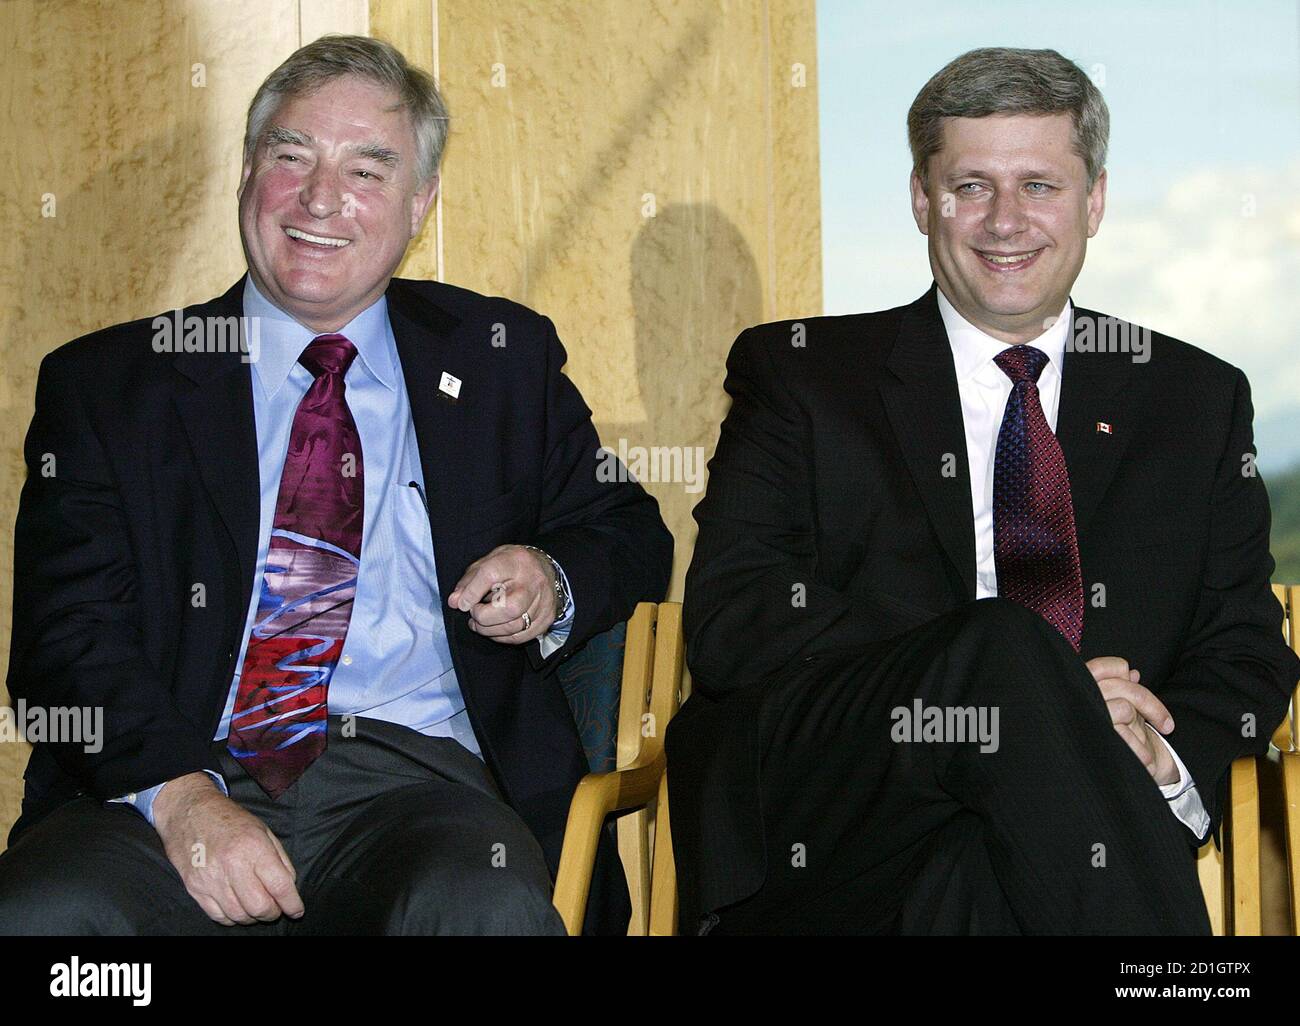 Canadian Prime Minister Stephen Harper (R) and International Trade Minister David Emerson laugh during a news conference in Vancouver, British Columbia August 30, 2006. Harper was in Vancouver to announce an additional 55 million dollars (CDN) ($50 million) in funding for the 2010 Winter Olympic games, local media reported.   REUTERS/Lyle Stafford (CANADA) Stock Photo